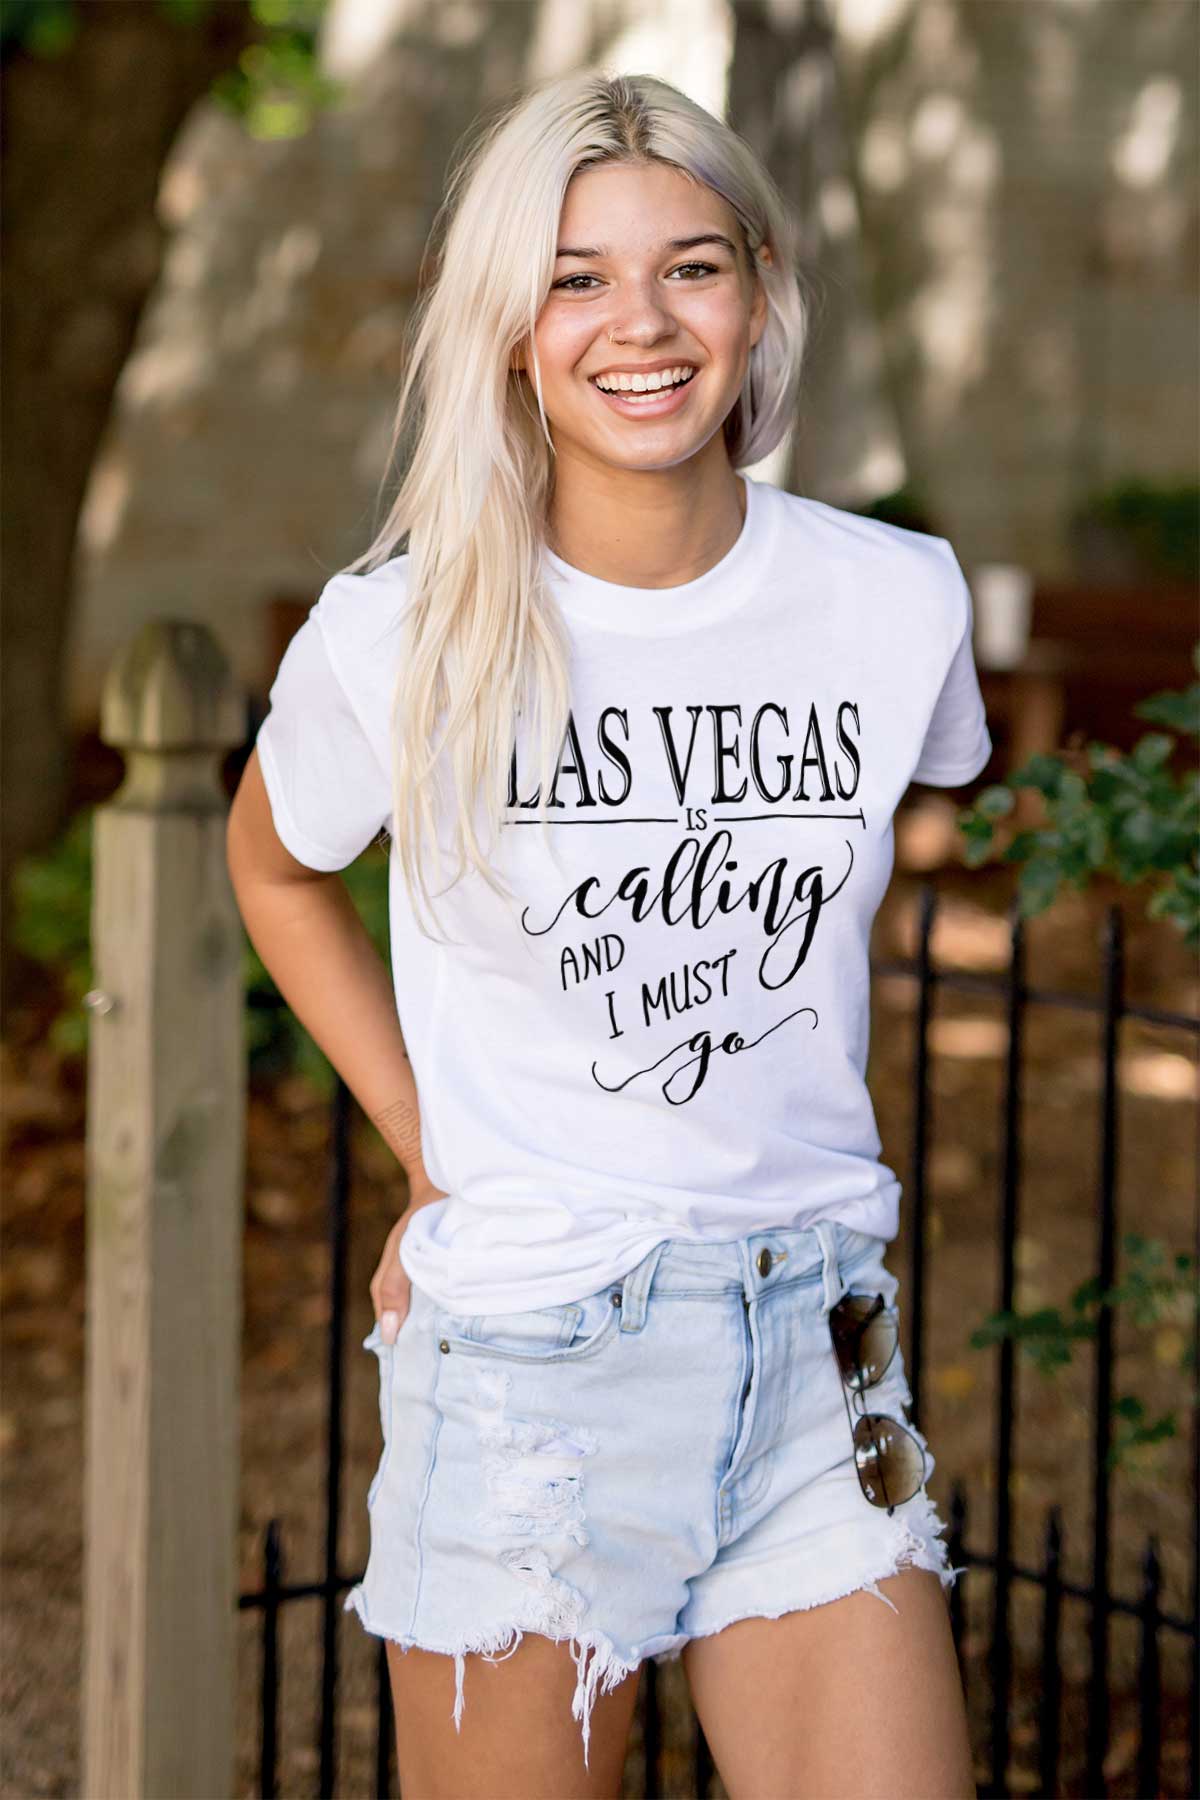 Las Vegas is Calling I Must Go Women's Graphic T Shirt Tees Brisco Brands 3X - image 3 of 5